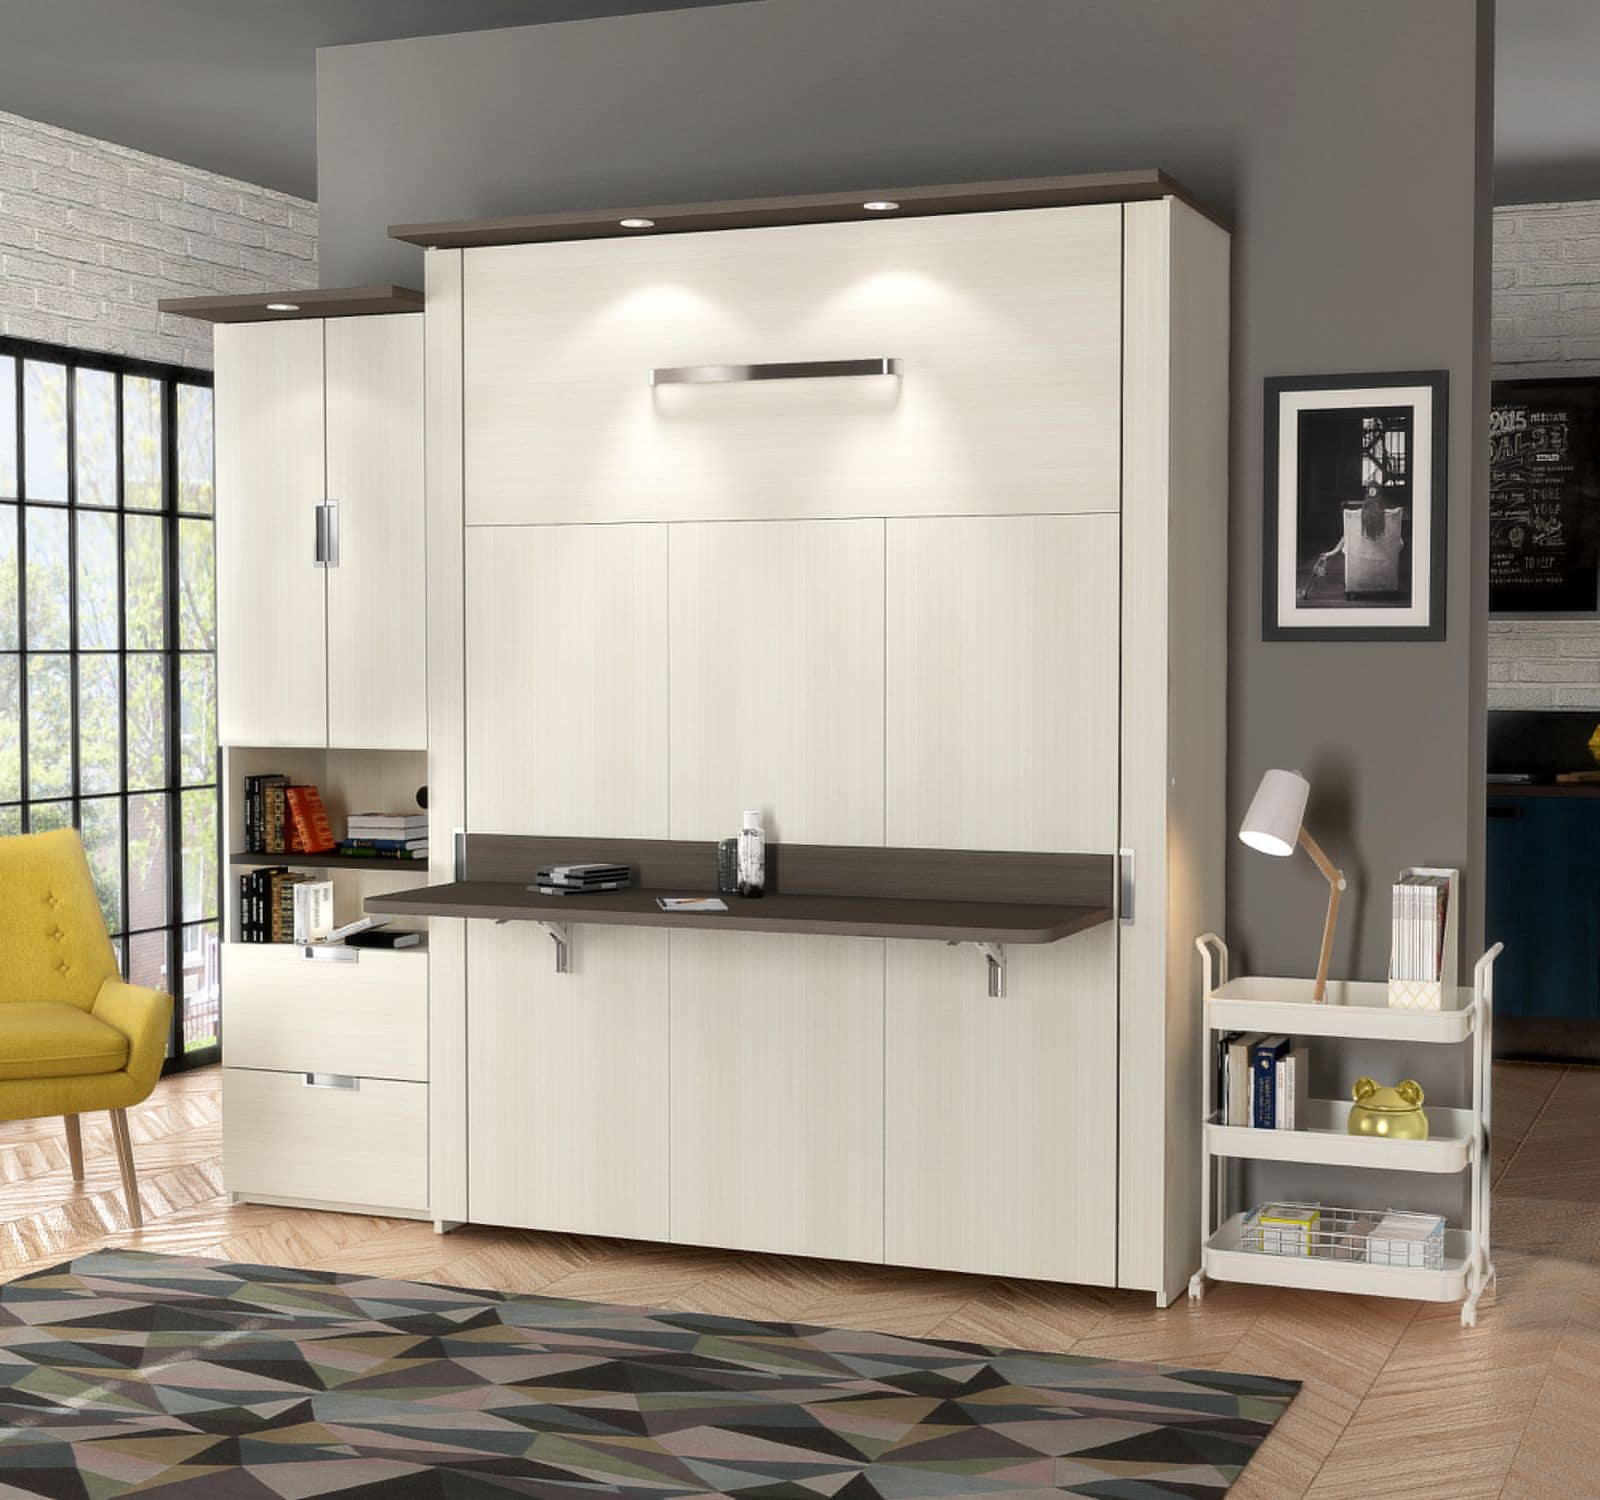 4 Reasons to Add a Murphy Bed with Desk to Your Home